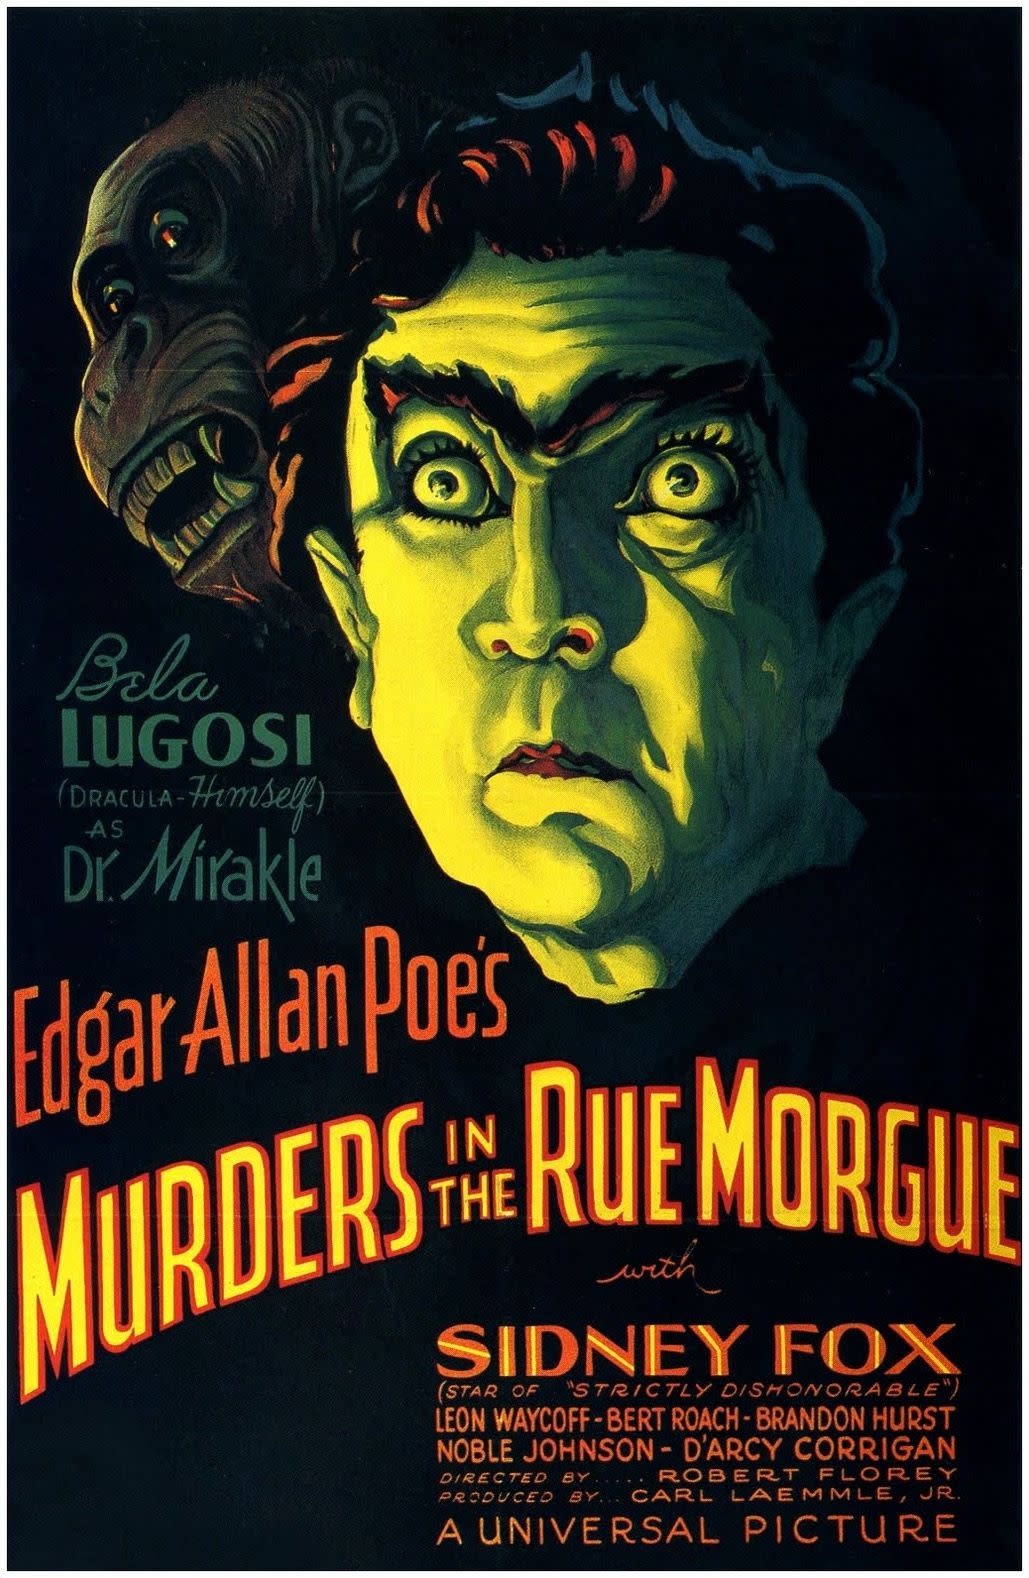 Promotional poster for Murders in the Rue Morgue